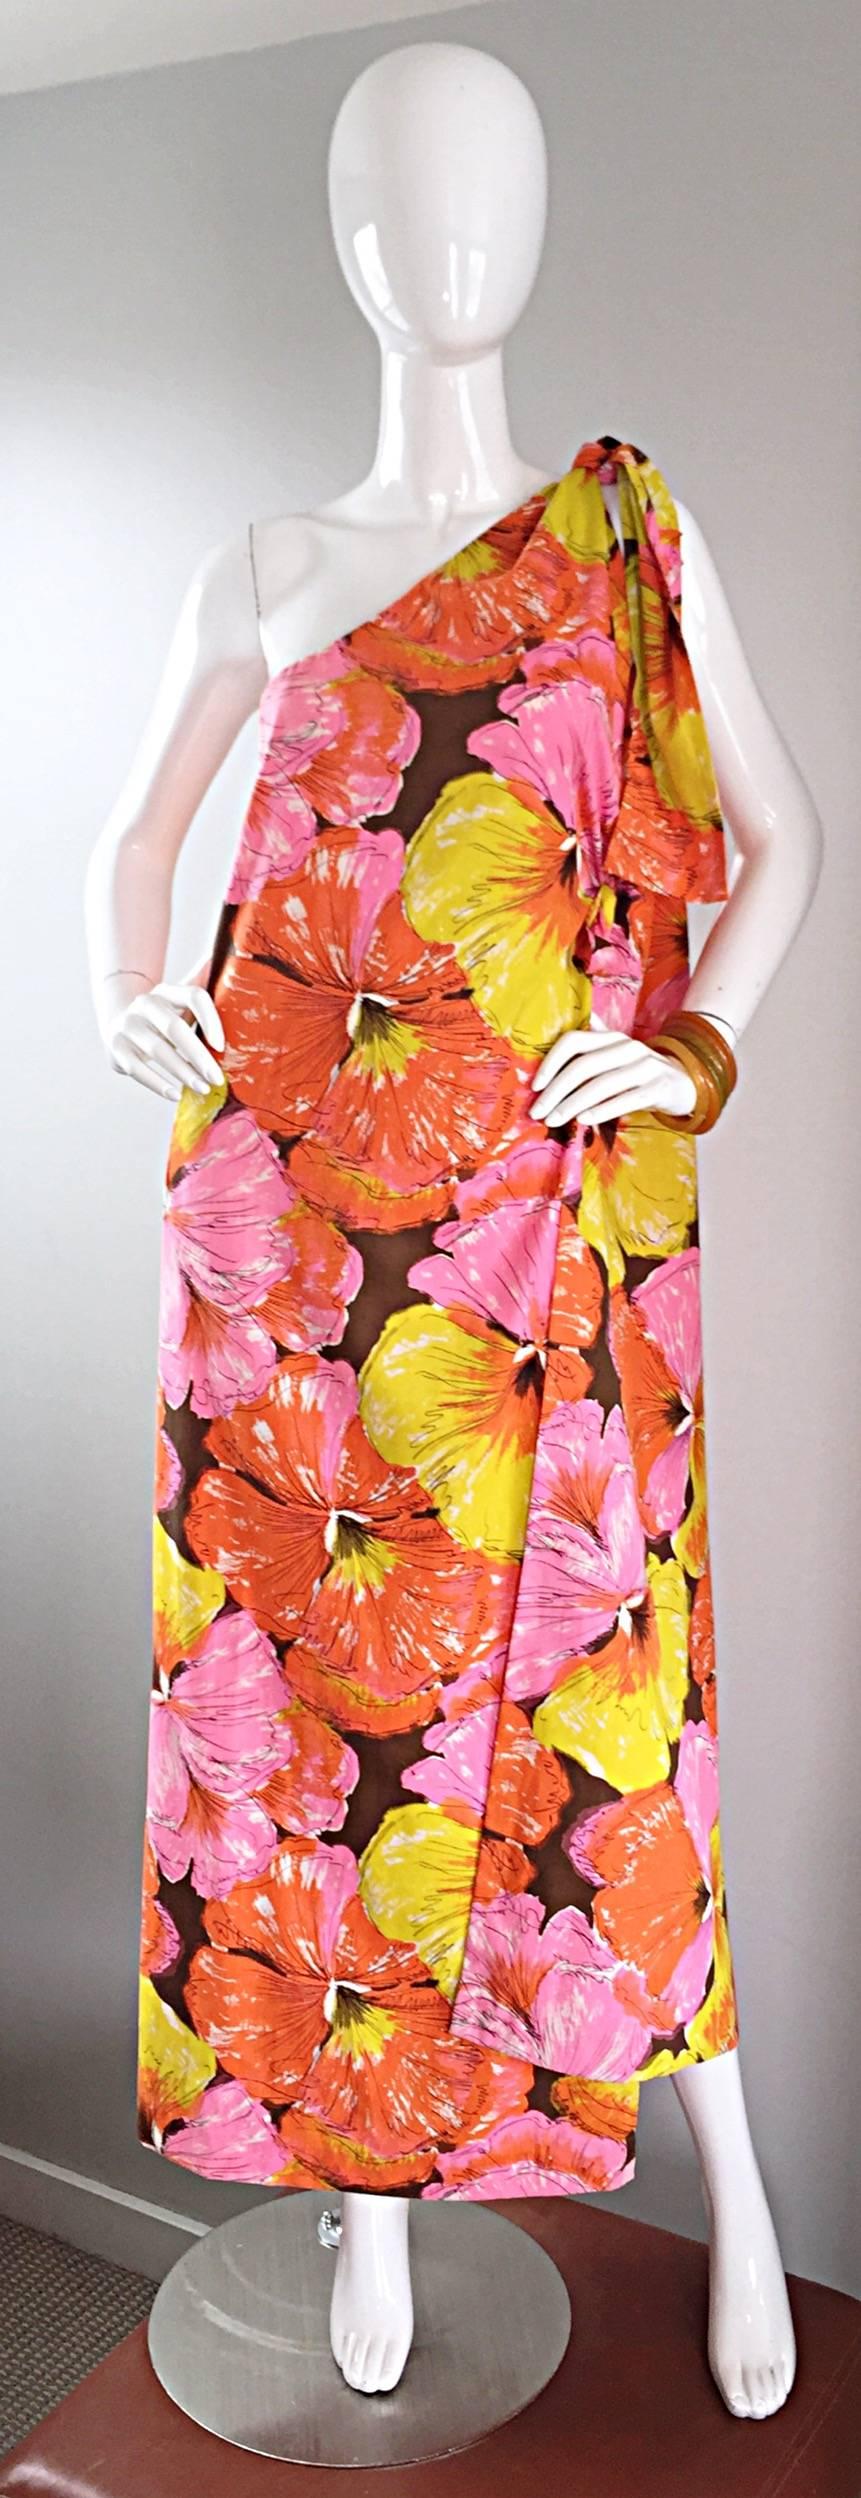 Amazing 1960s one shoulder toga caftan / kaftan maxi dress! Vibrant colorful hibiscus print in pink, yellow, orange, brown and white. Elastic at bust with a tie at one shoulder. Can also be worn as a halter dress (see photo). Lightweight comfortable